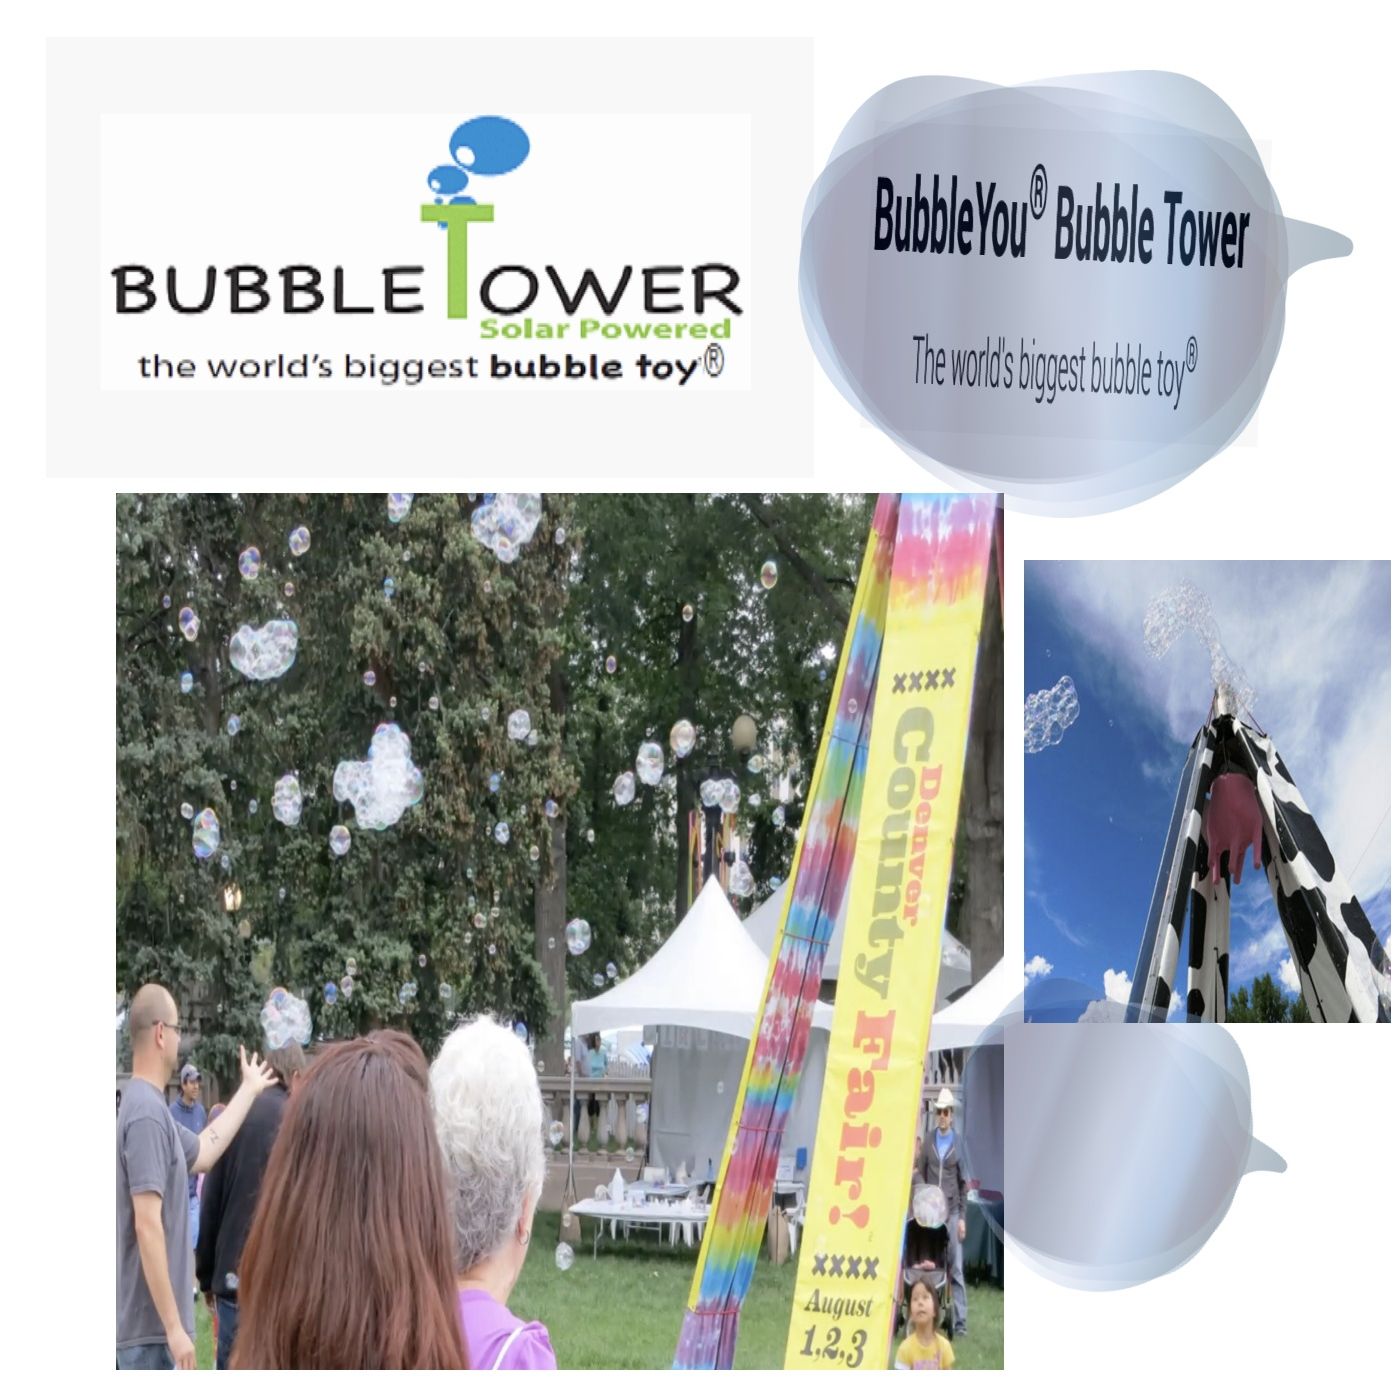 the Bubble Tower presented by Countyfaigrounds